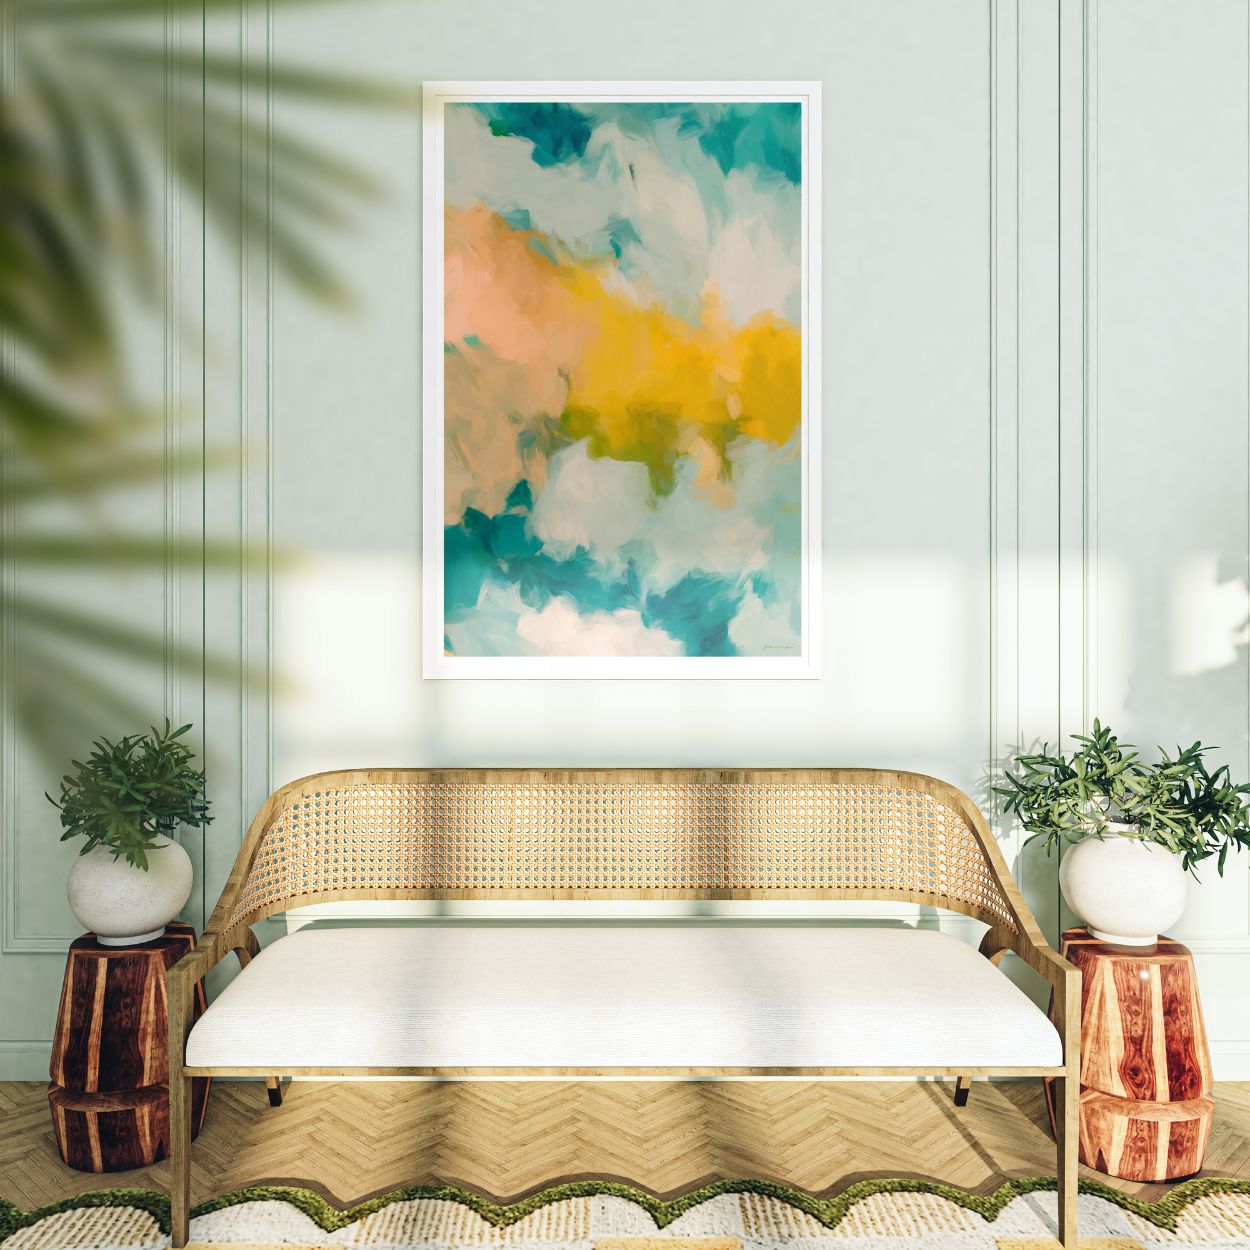 Beach Day, blue and yellow colorful abstract wall art print by Parima Studio. Large vertical wall art for over sofa in sitting room